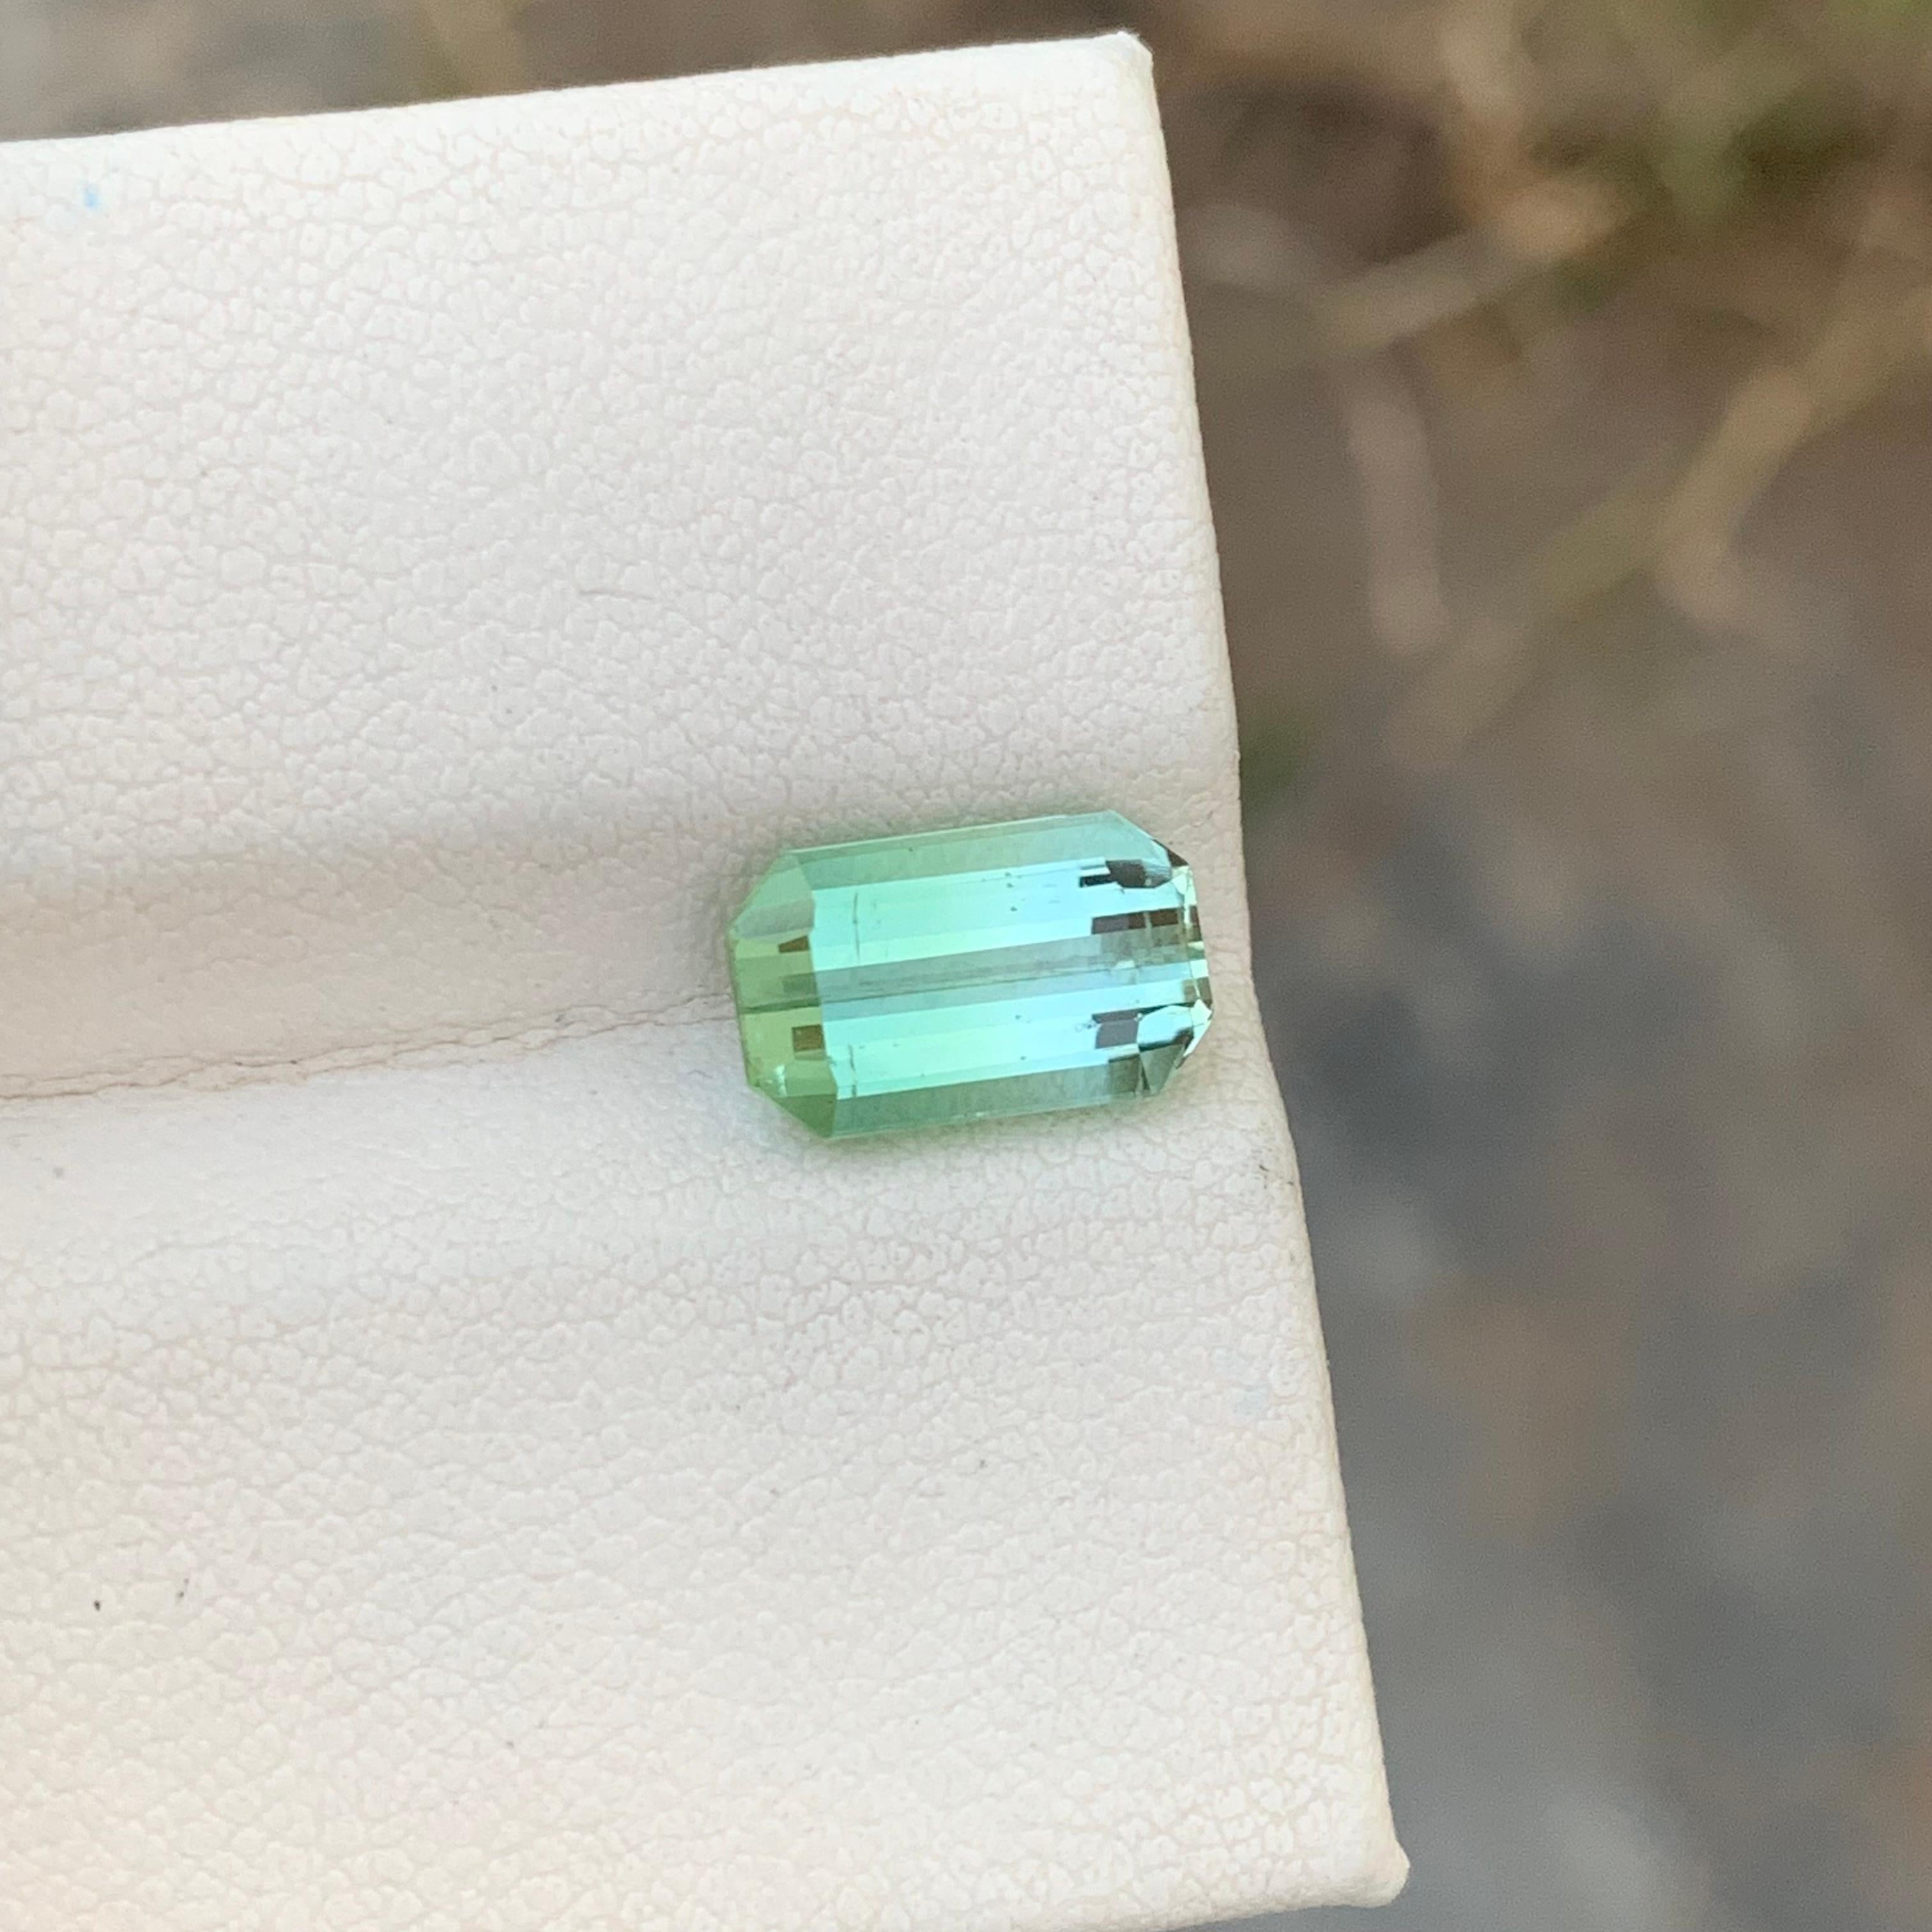 Loose Bi Colour Tourmaline
Weight: 2.90 Carats
Dimension: 10.4 x 6.4 x 5 Mm
Colour: Mint And Aqua Blue 
Origin: Afghanistan
Certificate: On Demand
Treatment: Non

Tourmaline is a captivating gemstone known for its remarkable variety of colors,